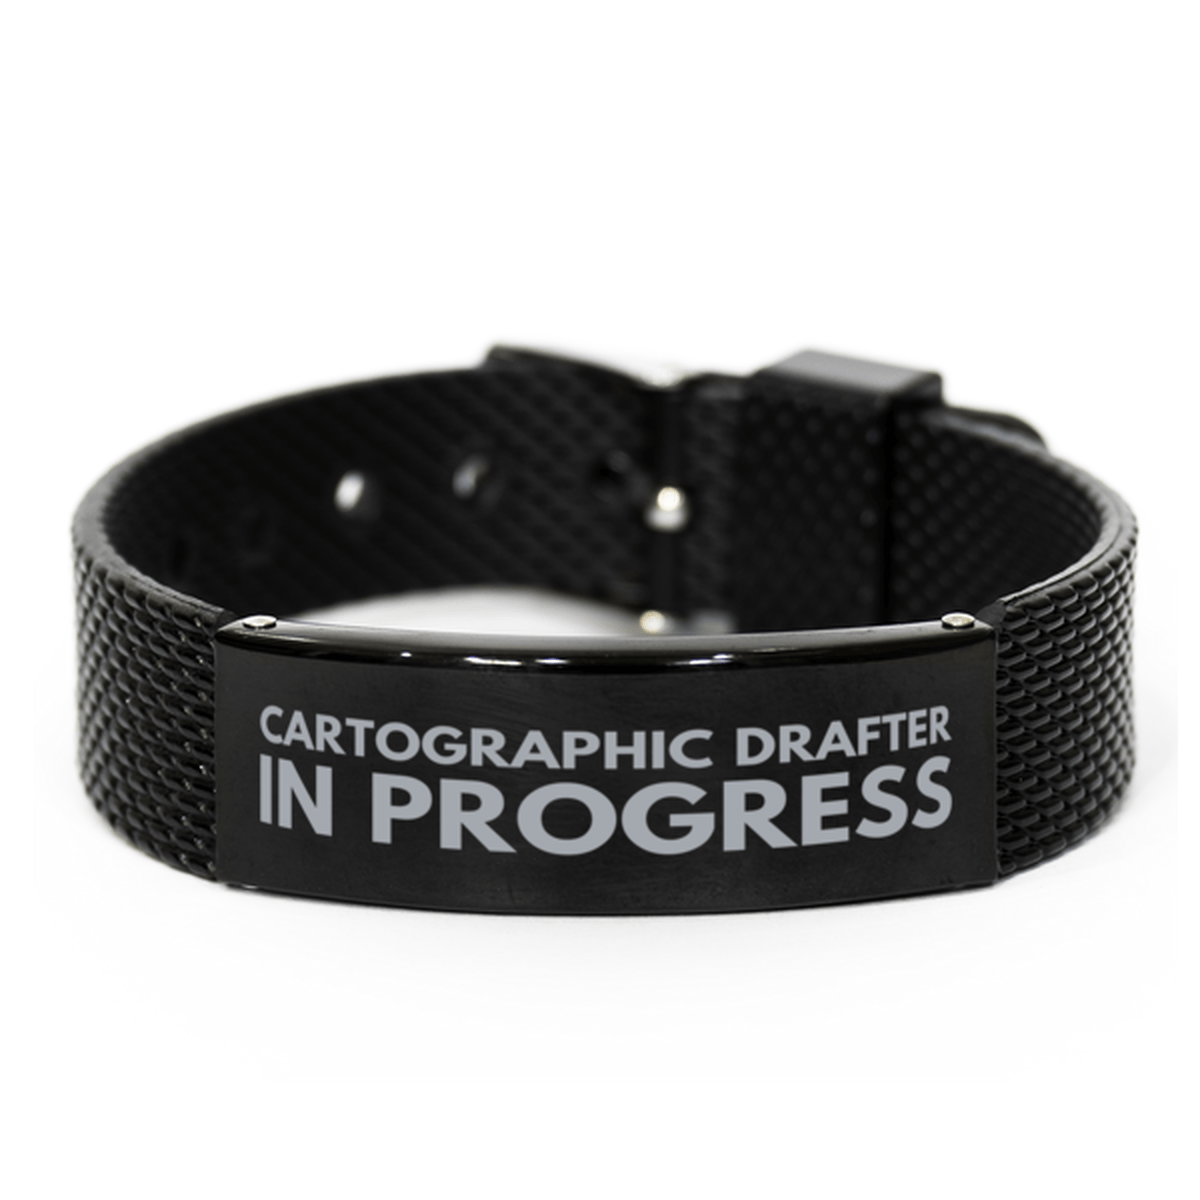 Inspirational Cartographic Drafter Black Shark Mesh Bracelet, Cartographic Drafter In Progress, Best Graduation Gifts for Students